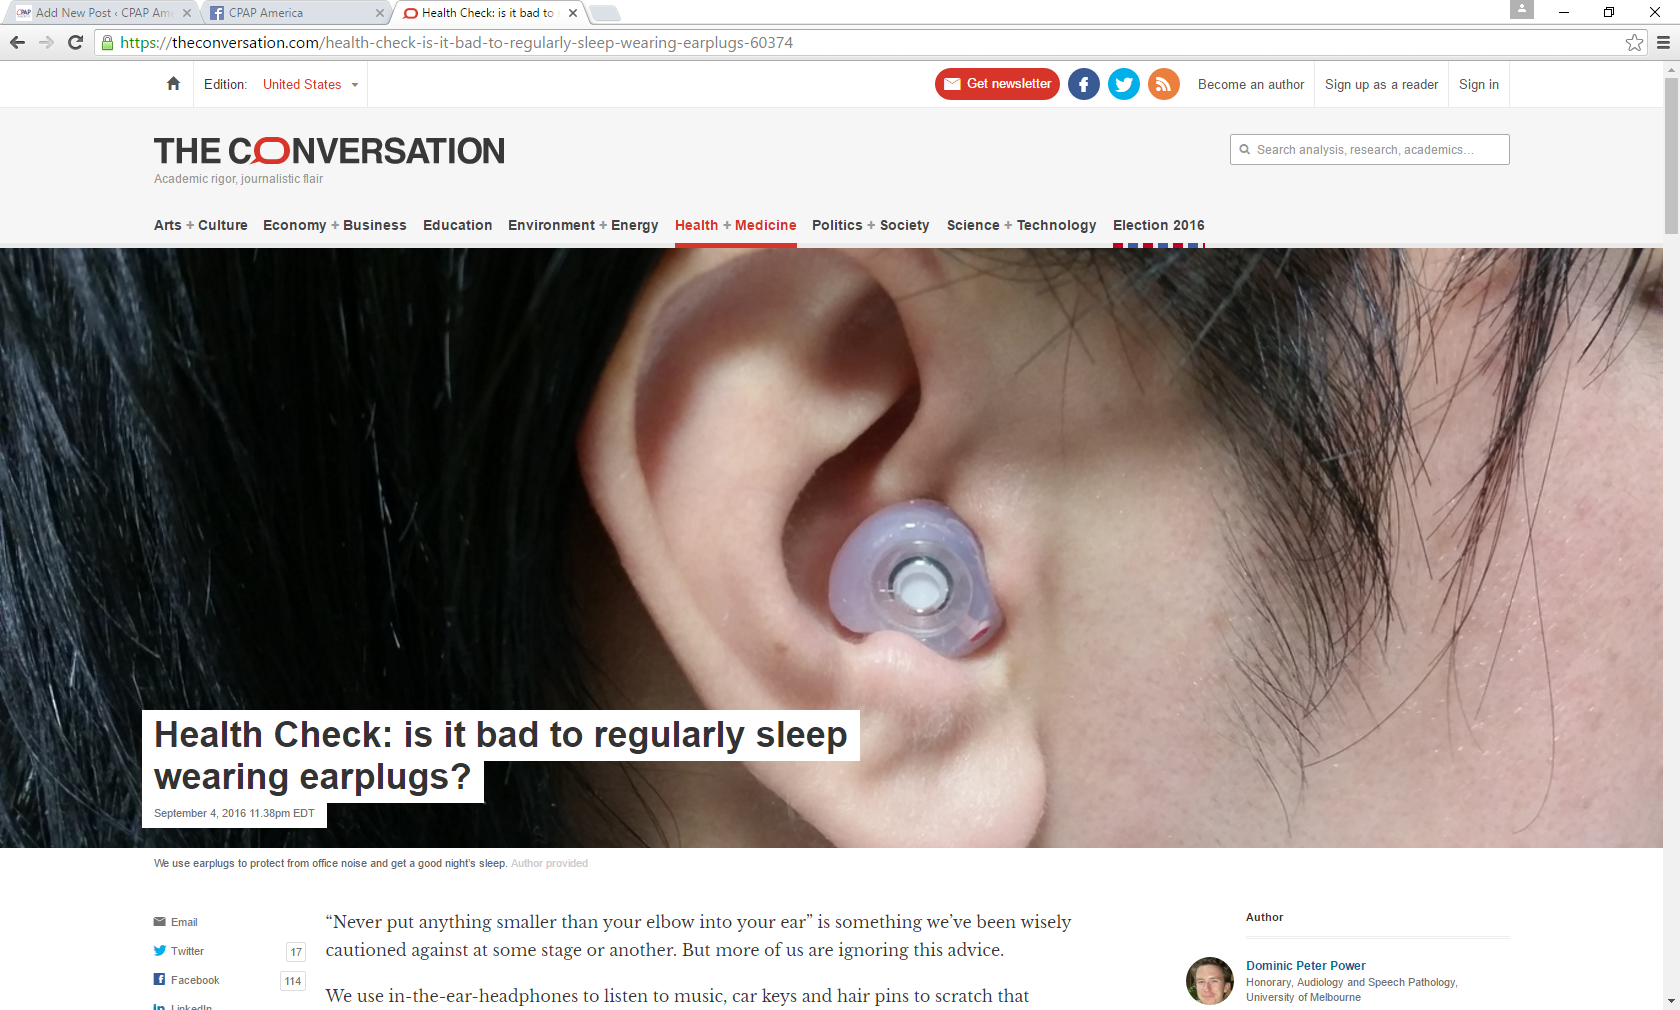 Is it healthy to wear earplugs while sleeping? New concerns arise